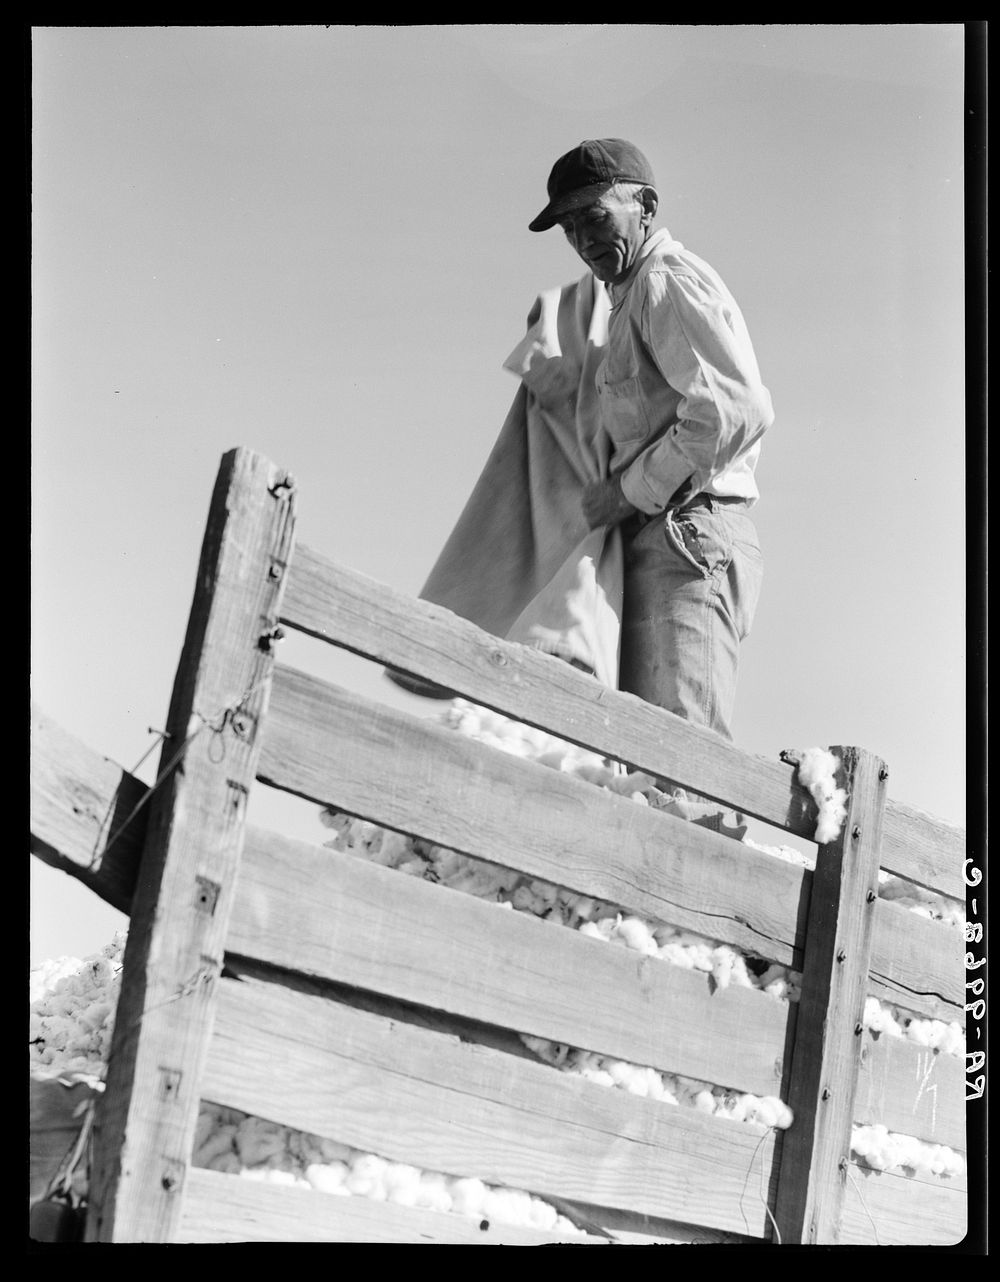 Loading cotton. Southern San Joaquin Valley, California. Sourced from the Library of Congress.